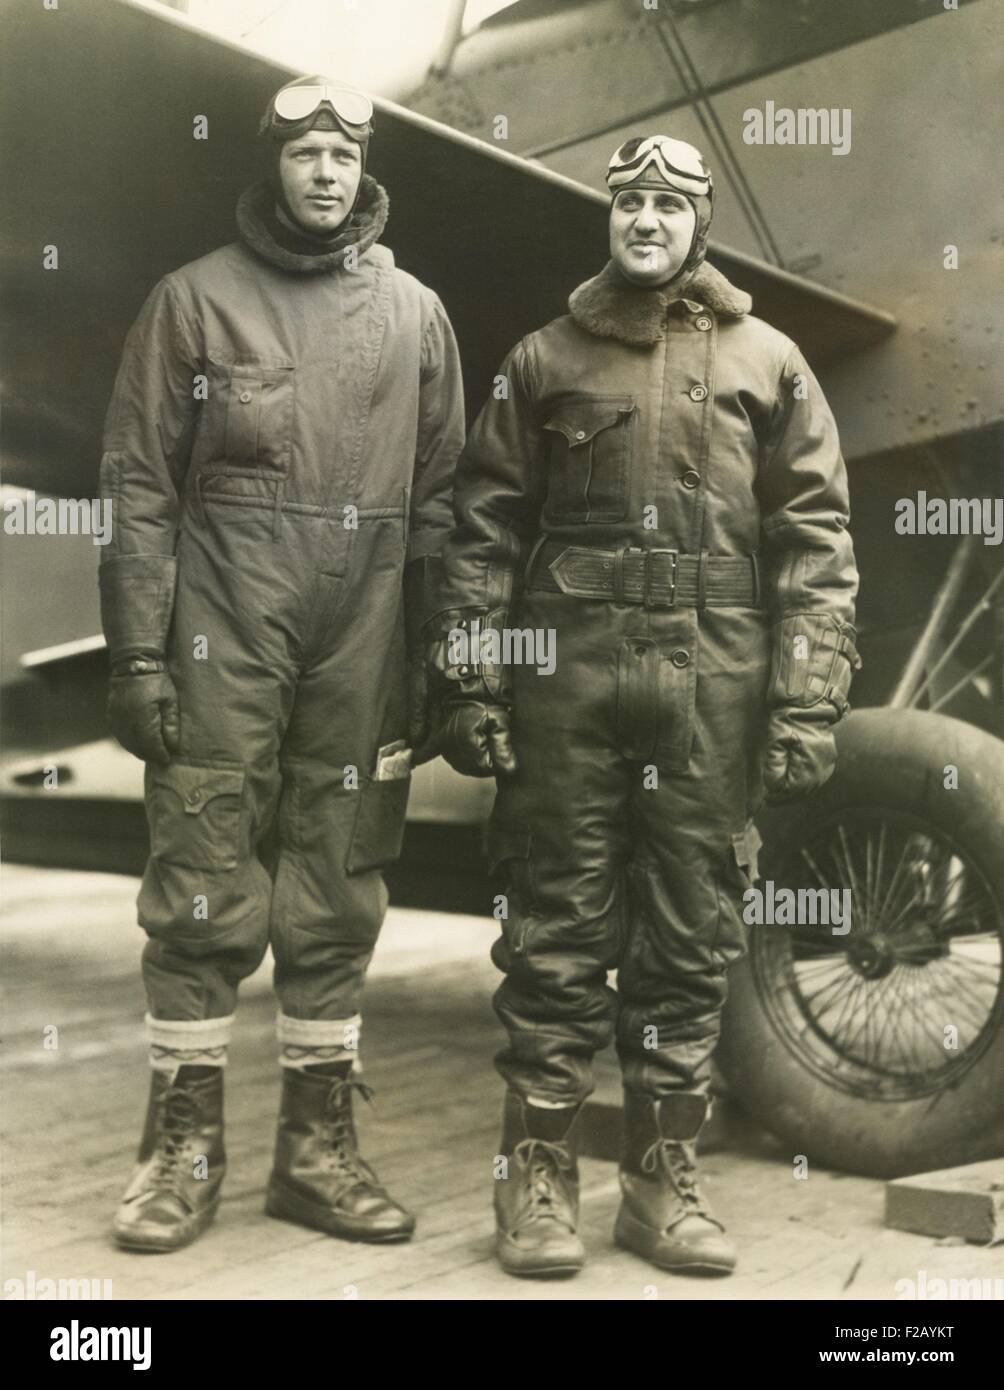 Col. Charles A. Lindbergh (left) and Harry F. Guggenheim in flight-suits. Dec. 8, 1928. The aviation pioneers took off from the Stock Photo